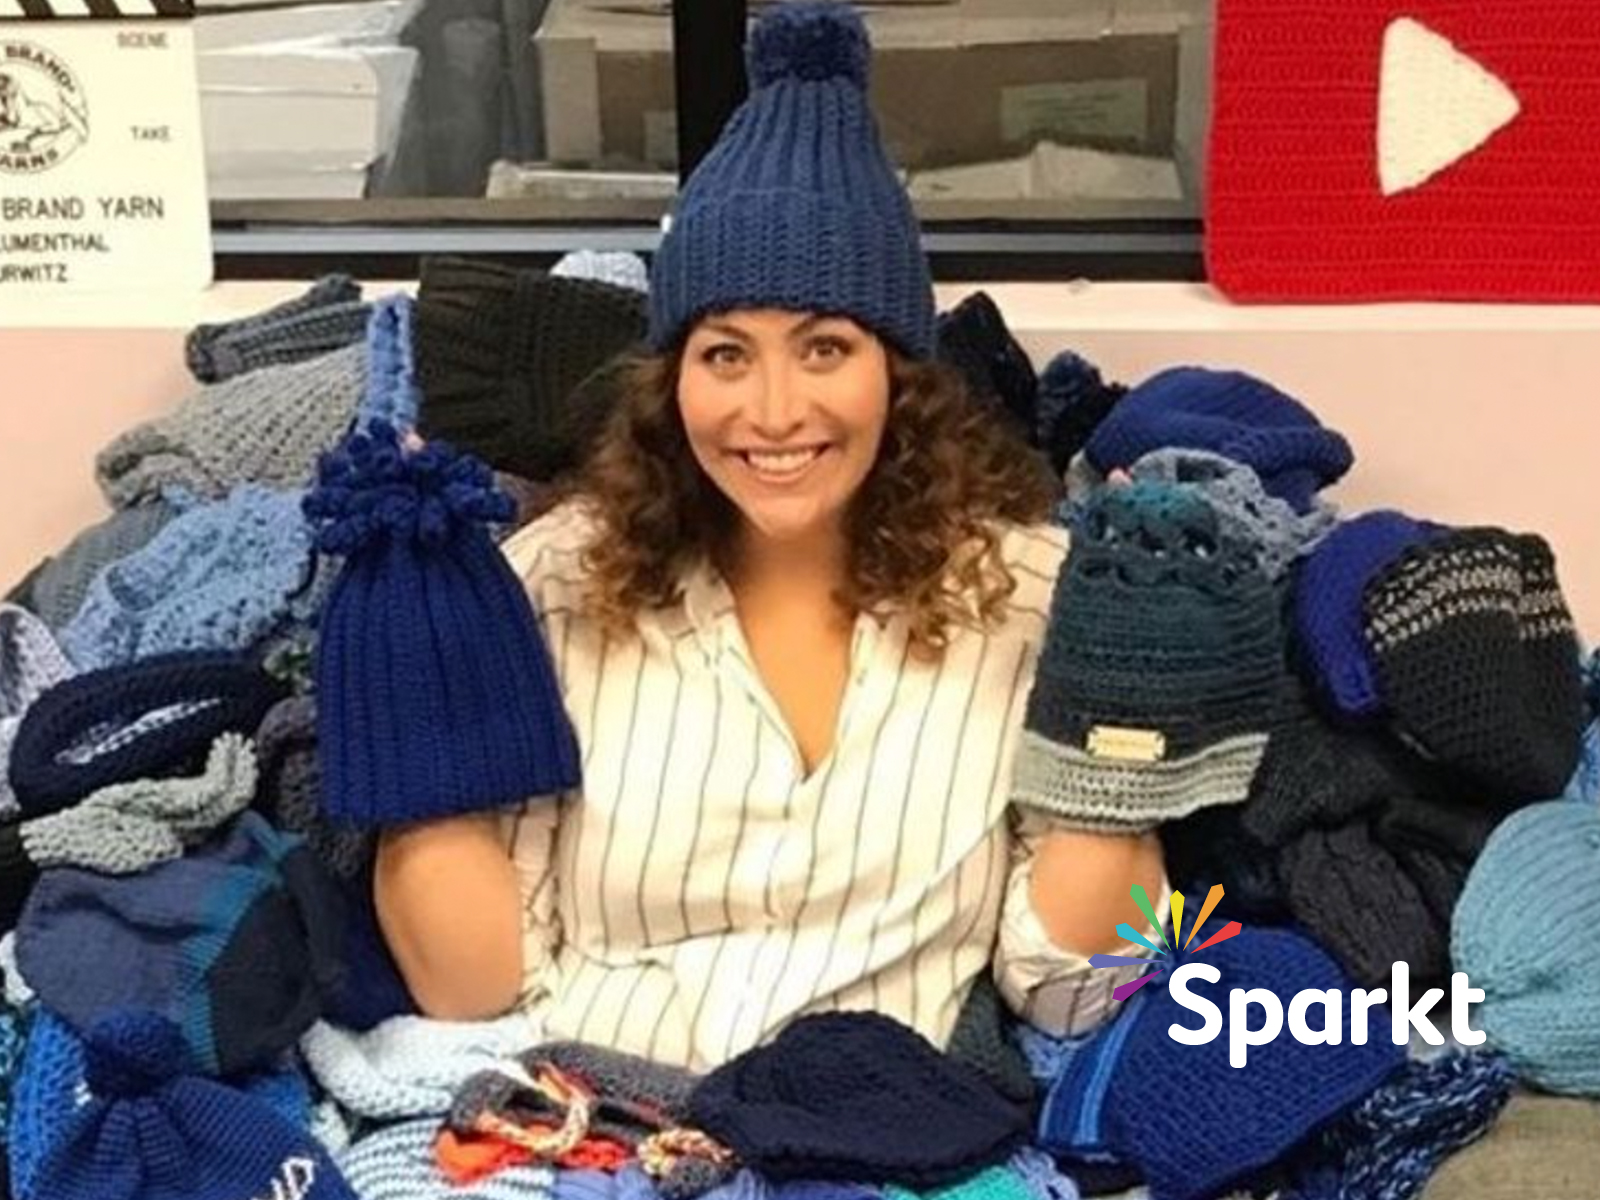 Sparkt logo overlaid on image of Shira with pile of hats